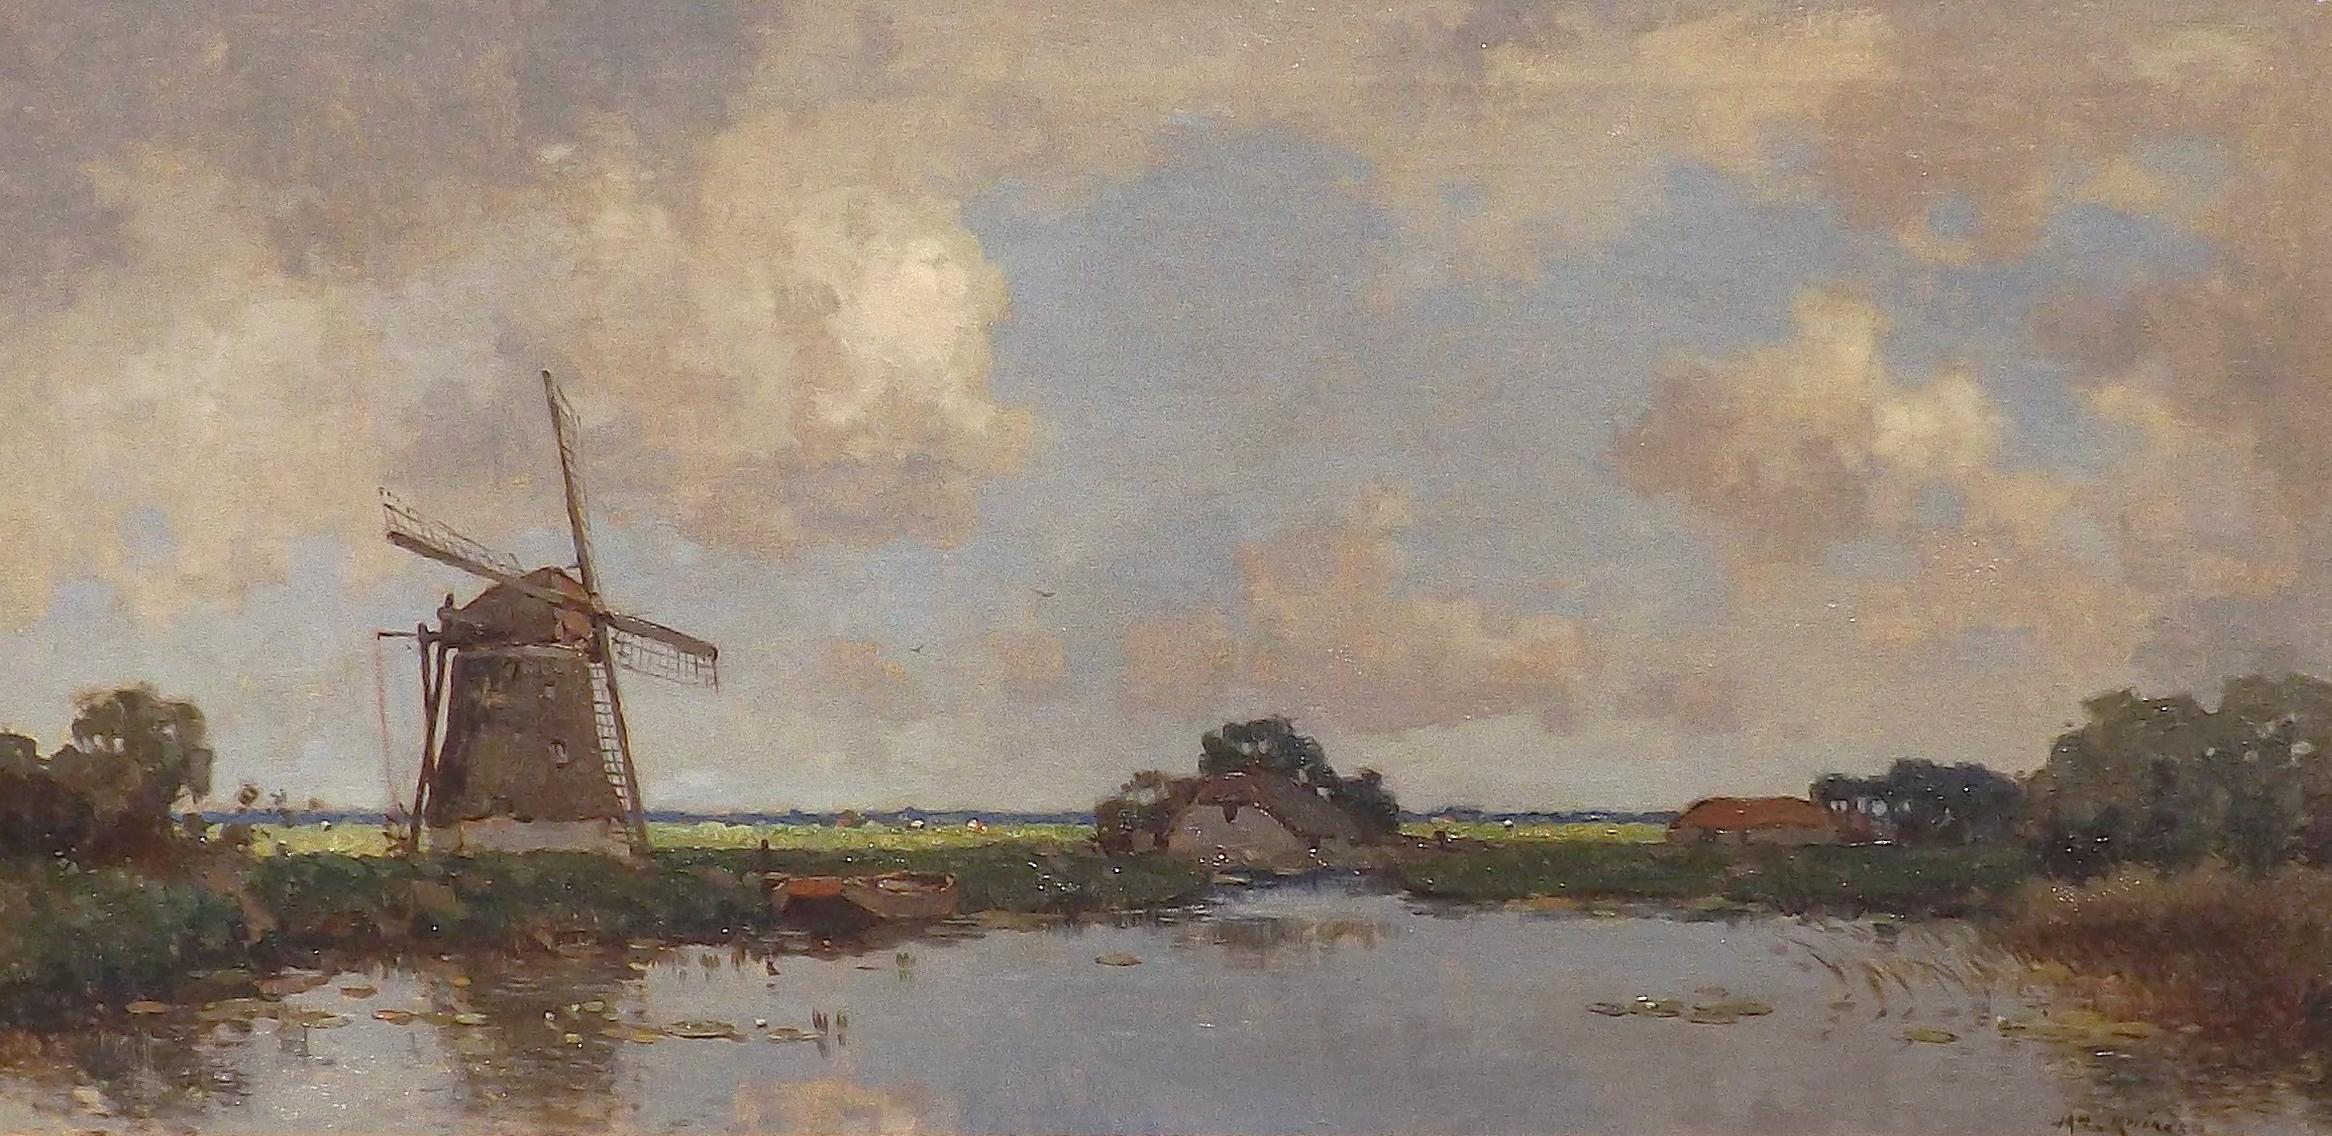 A magnificent painting of a Dutch or Flemish windmill near a farm by listed artist Jan Knikker, Sr. An idyllic scene of The Netherlands, a farm landscape on an overcast day. The sun has cast a heavy shadow on the water while the distant fields are